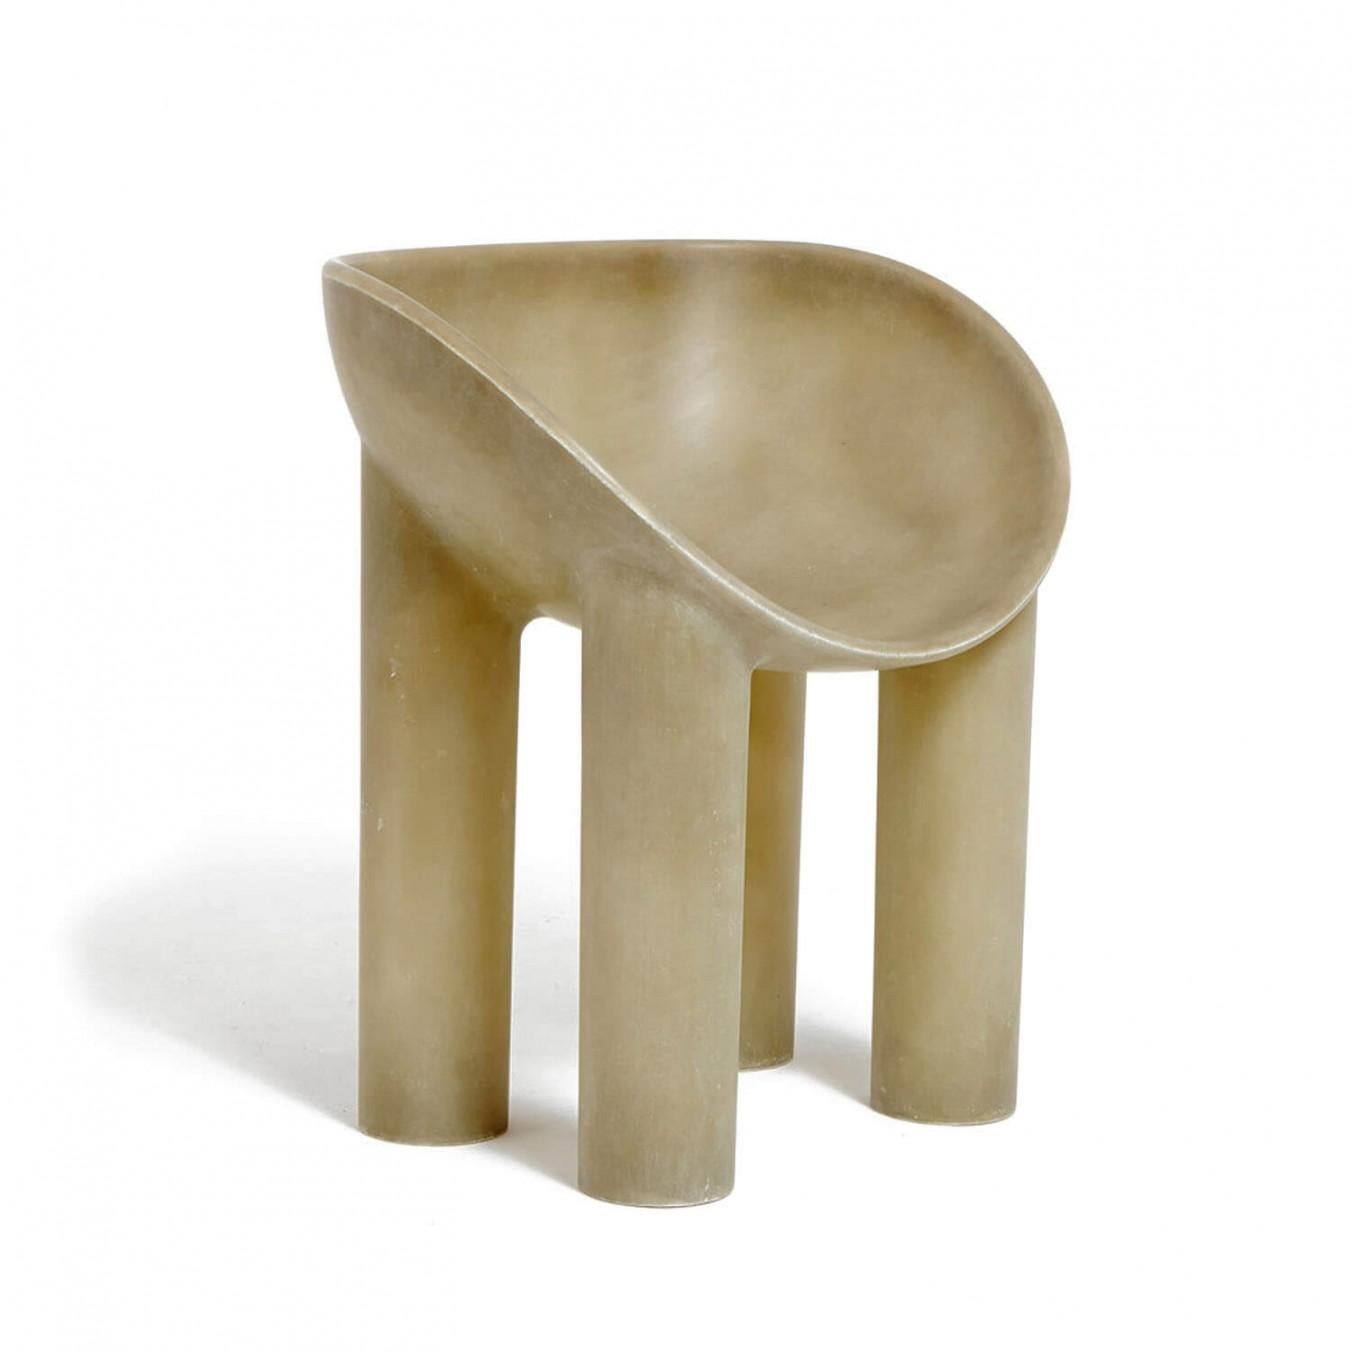 Contemporary Raw Fiberglass Chair, Roly-Poly Dining Chair by Faye Toogood In New Condition For Sale In Warsaw, PL